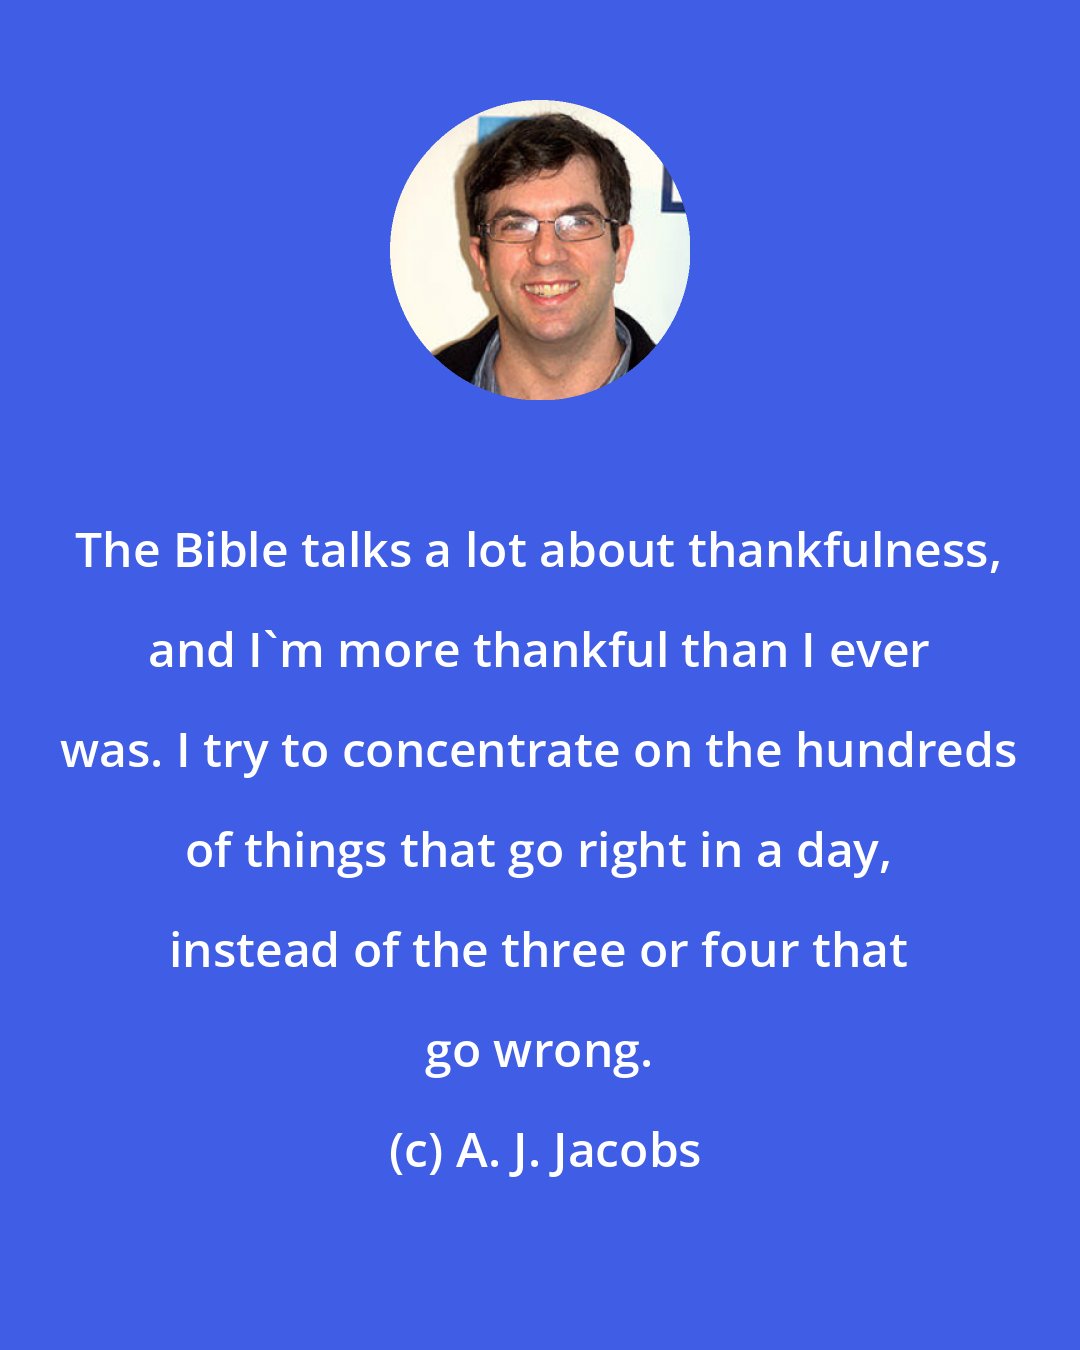 A. J. Jacobs: The Bible talks a lot about thankfulness, and I'm more thankful than I ever was. I try to concentrate on the hundreds of things that go right in a day, instead of the three or four that go wrong.